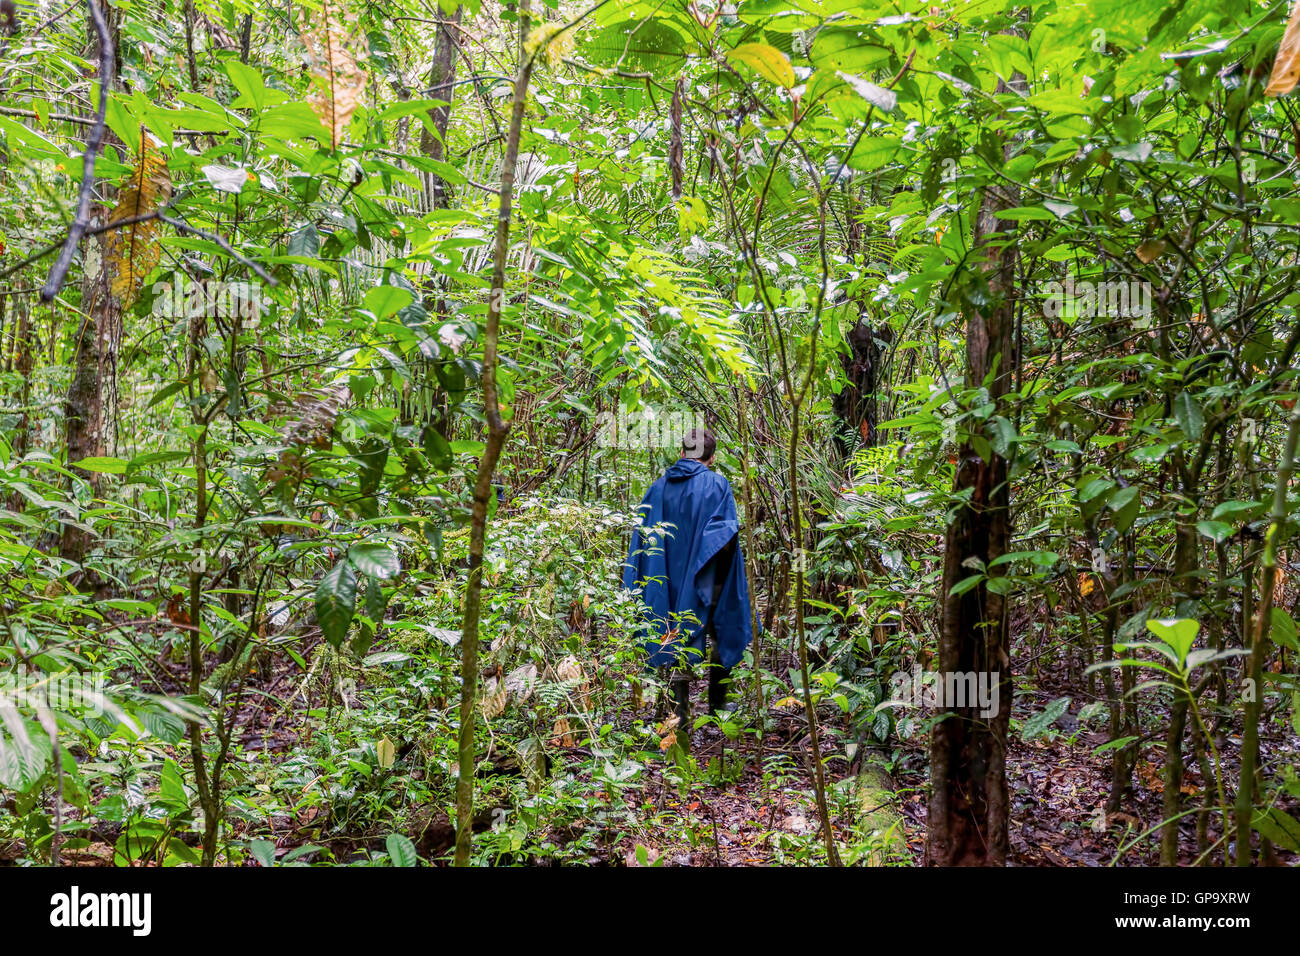 Silhouette Of A Man With A Blue Rain Coat Deep In The Amazonian Jungle, National Park Cuyabeno, South America Stock Photo